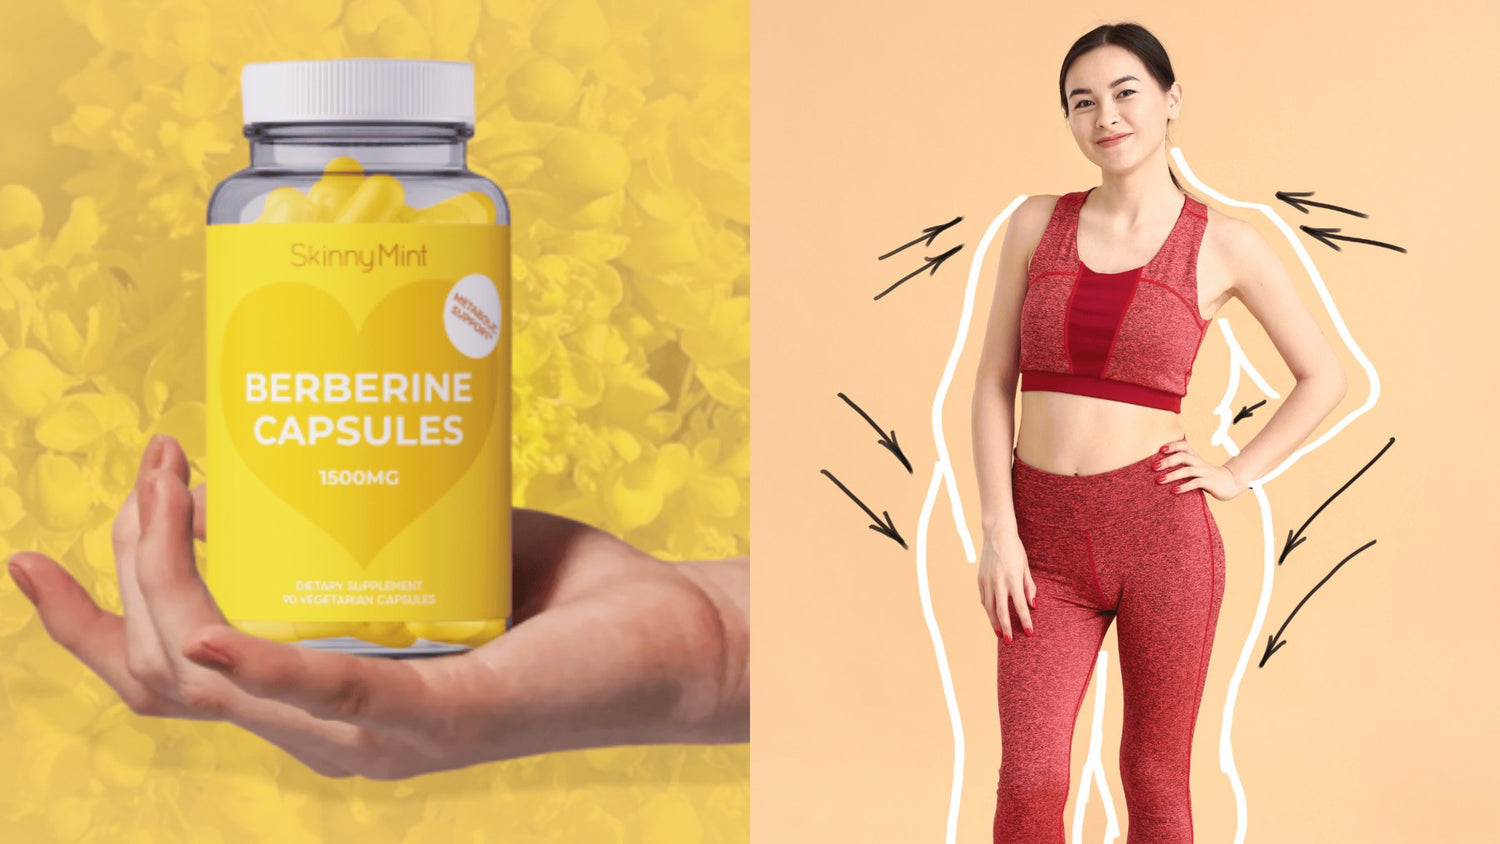 SkinnyMint Beberine Capsules and model who has lost weight naturally.